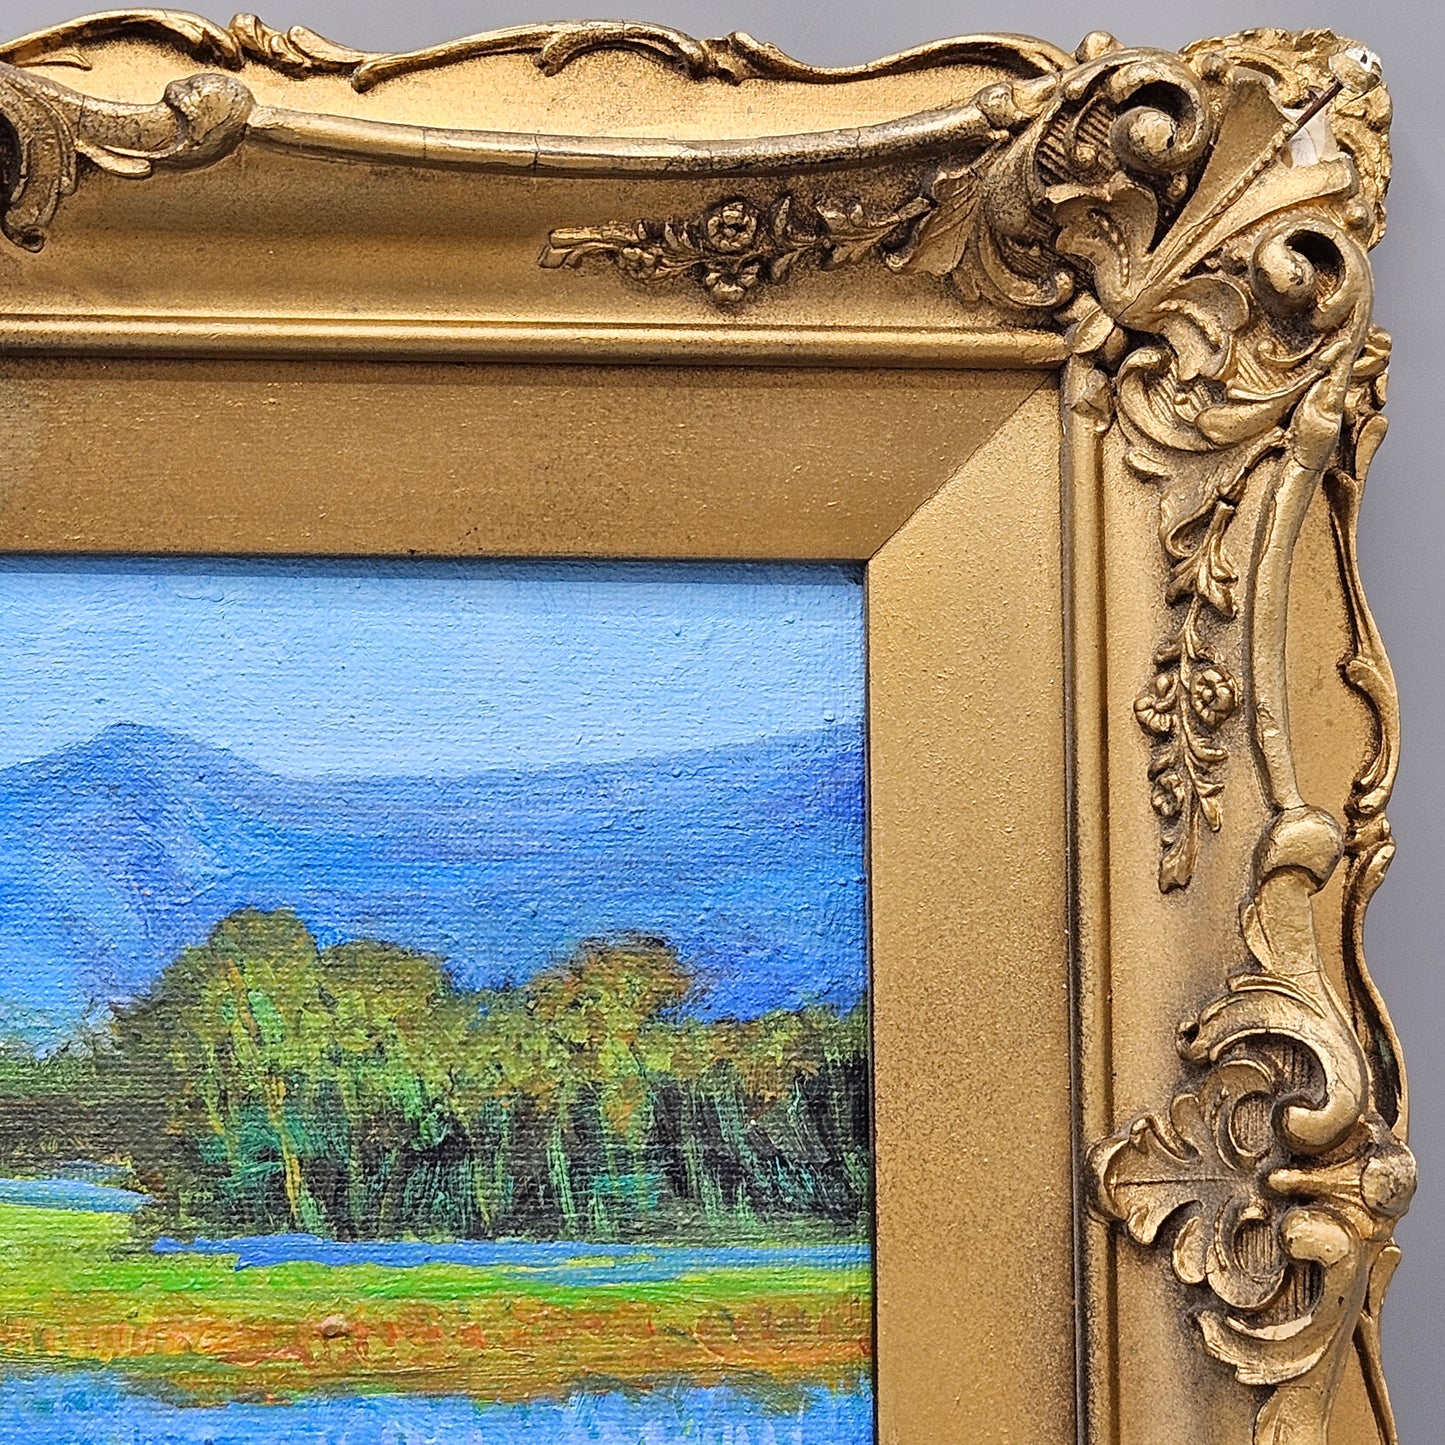 Beautiful Colorful Landscape Painting in Antique Gold Gilt Ornate Frame